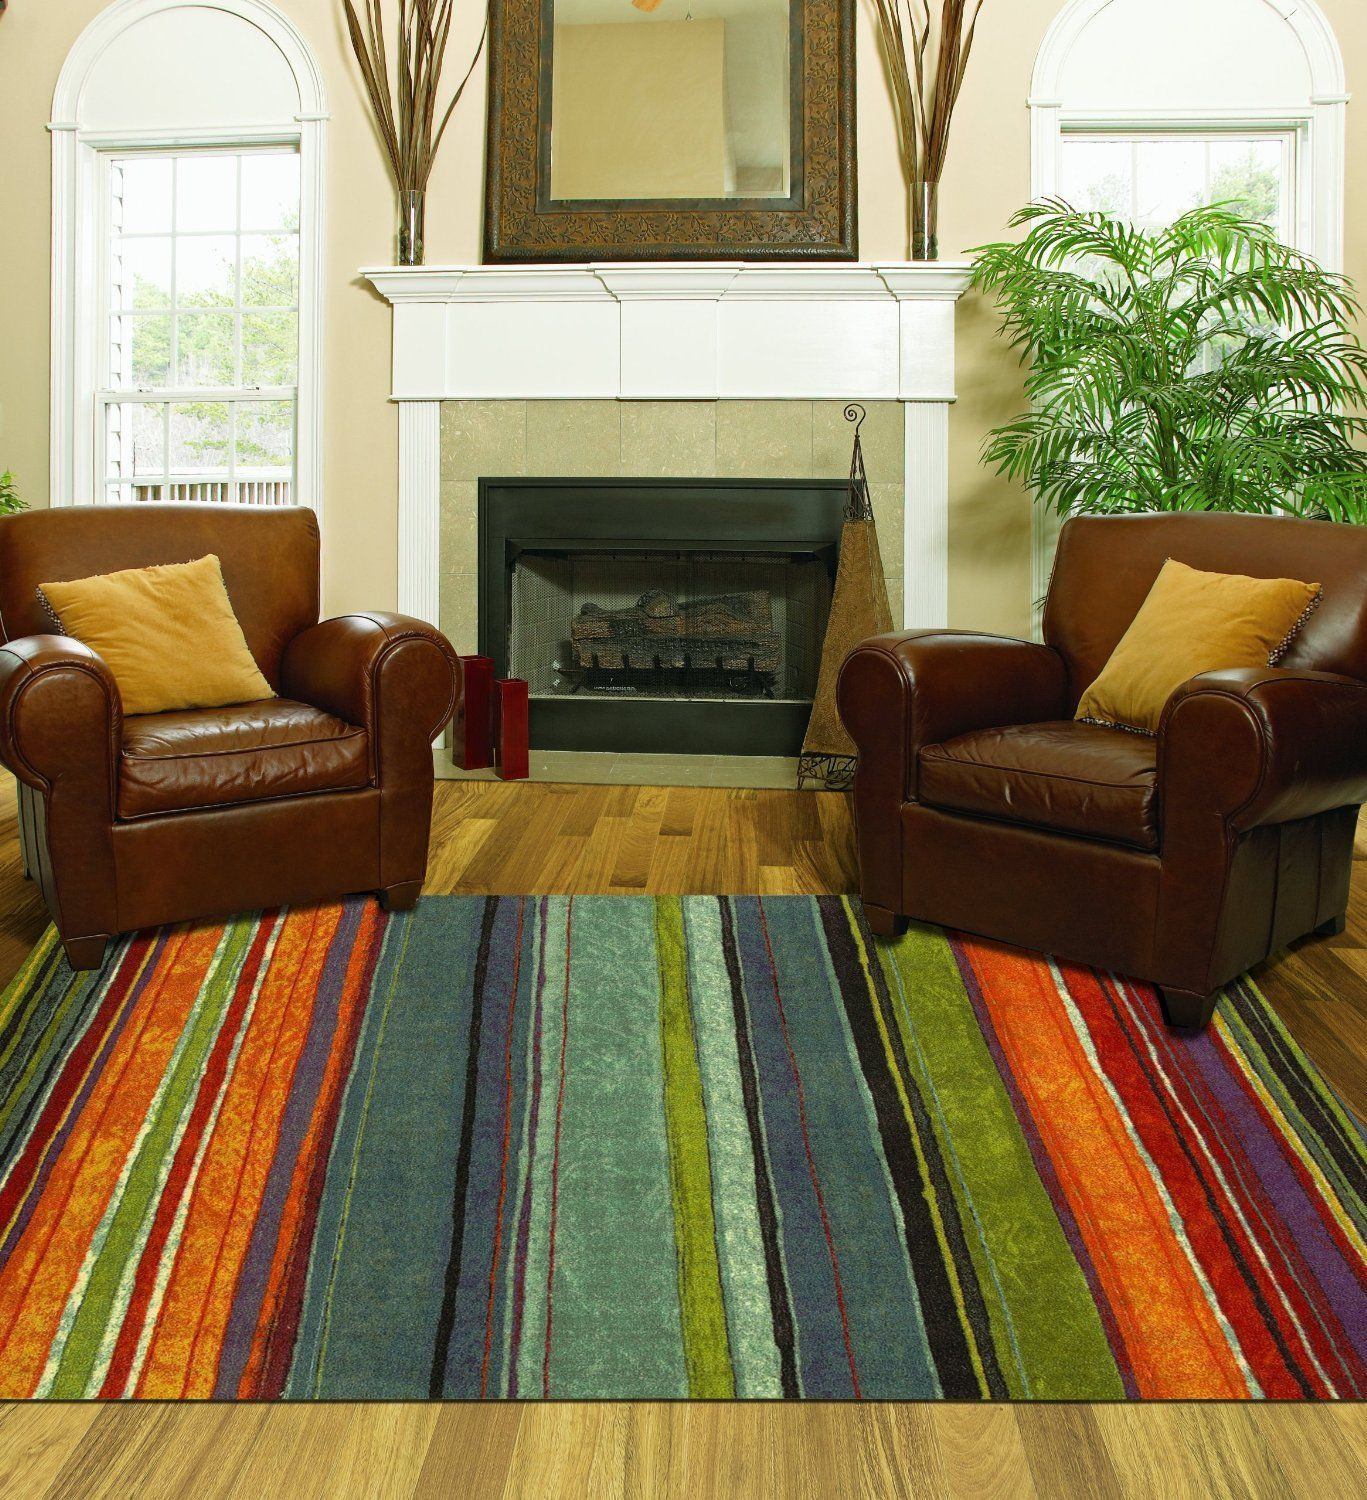 Throw Rugs For Living Room
 Area Rug Colorful 8x10 Living Room Size Carpet Home